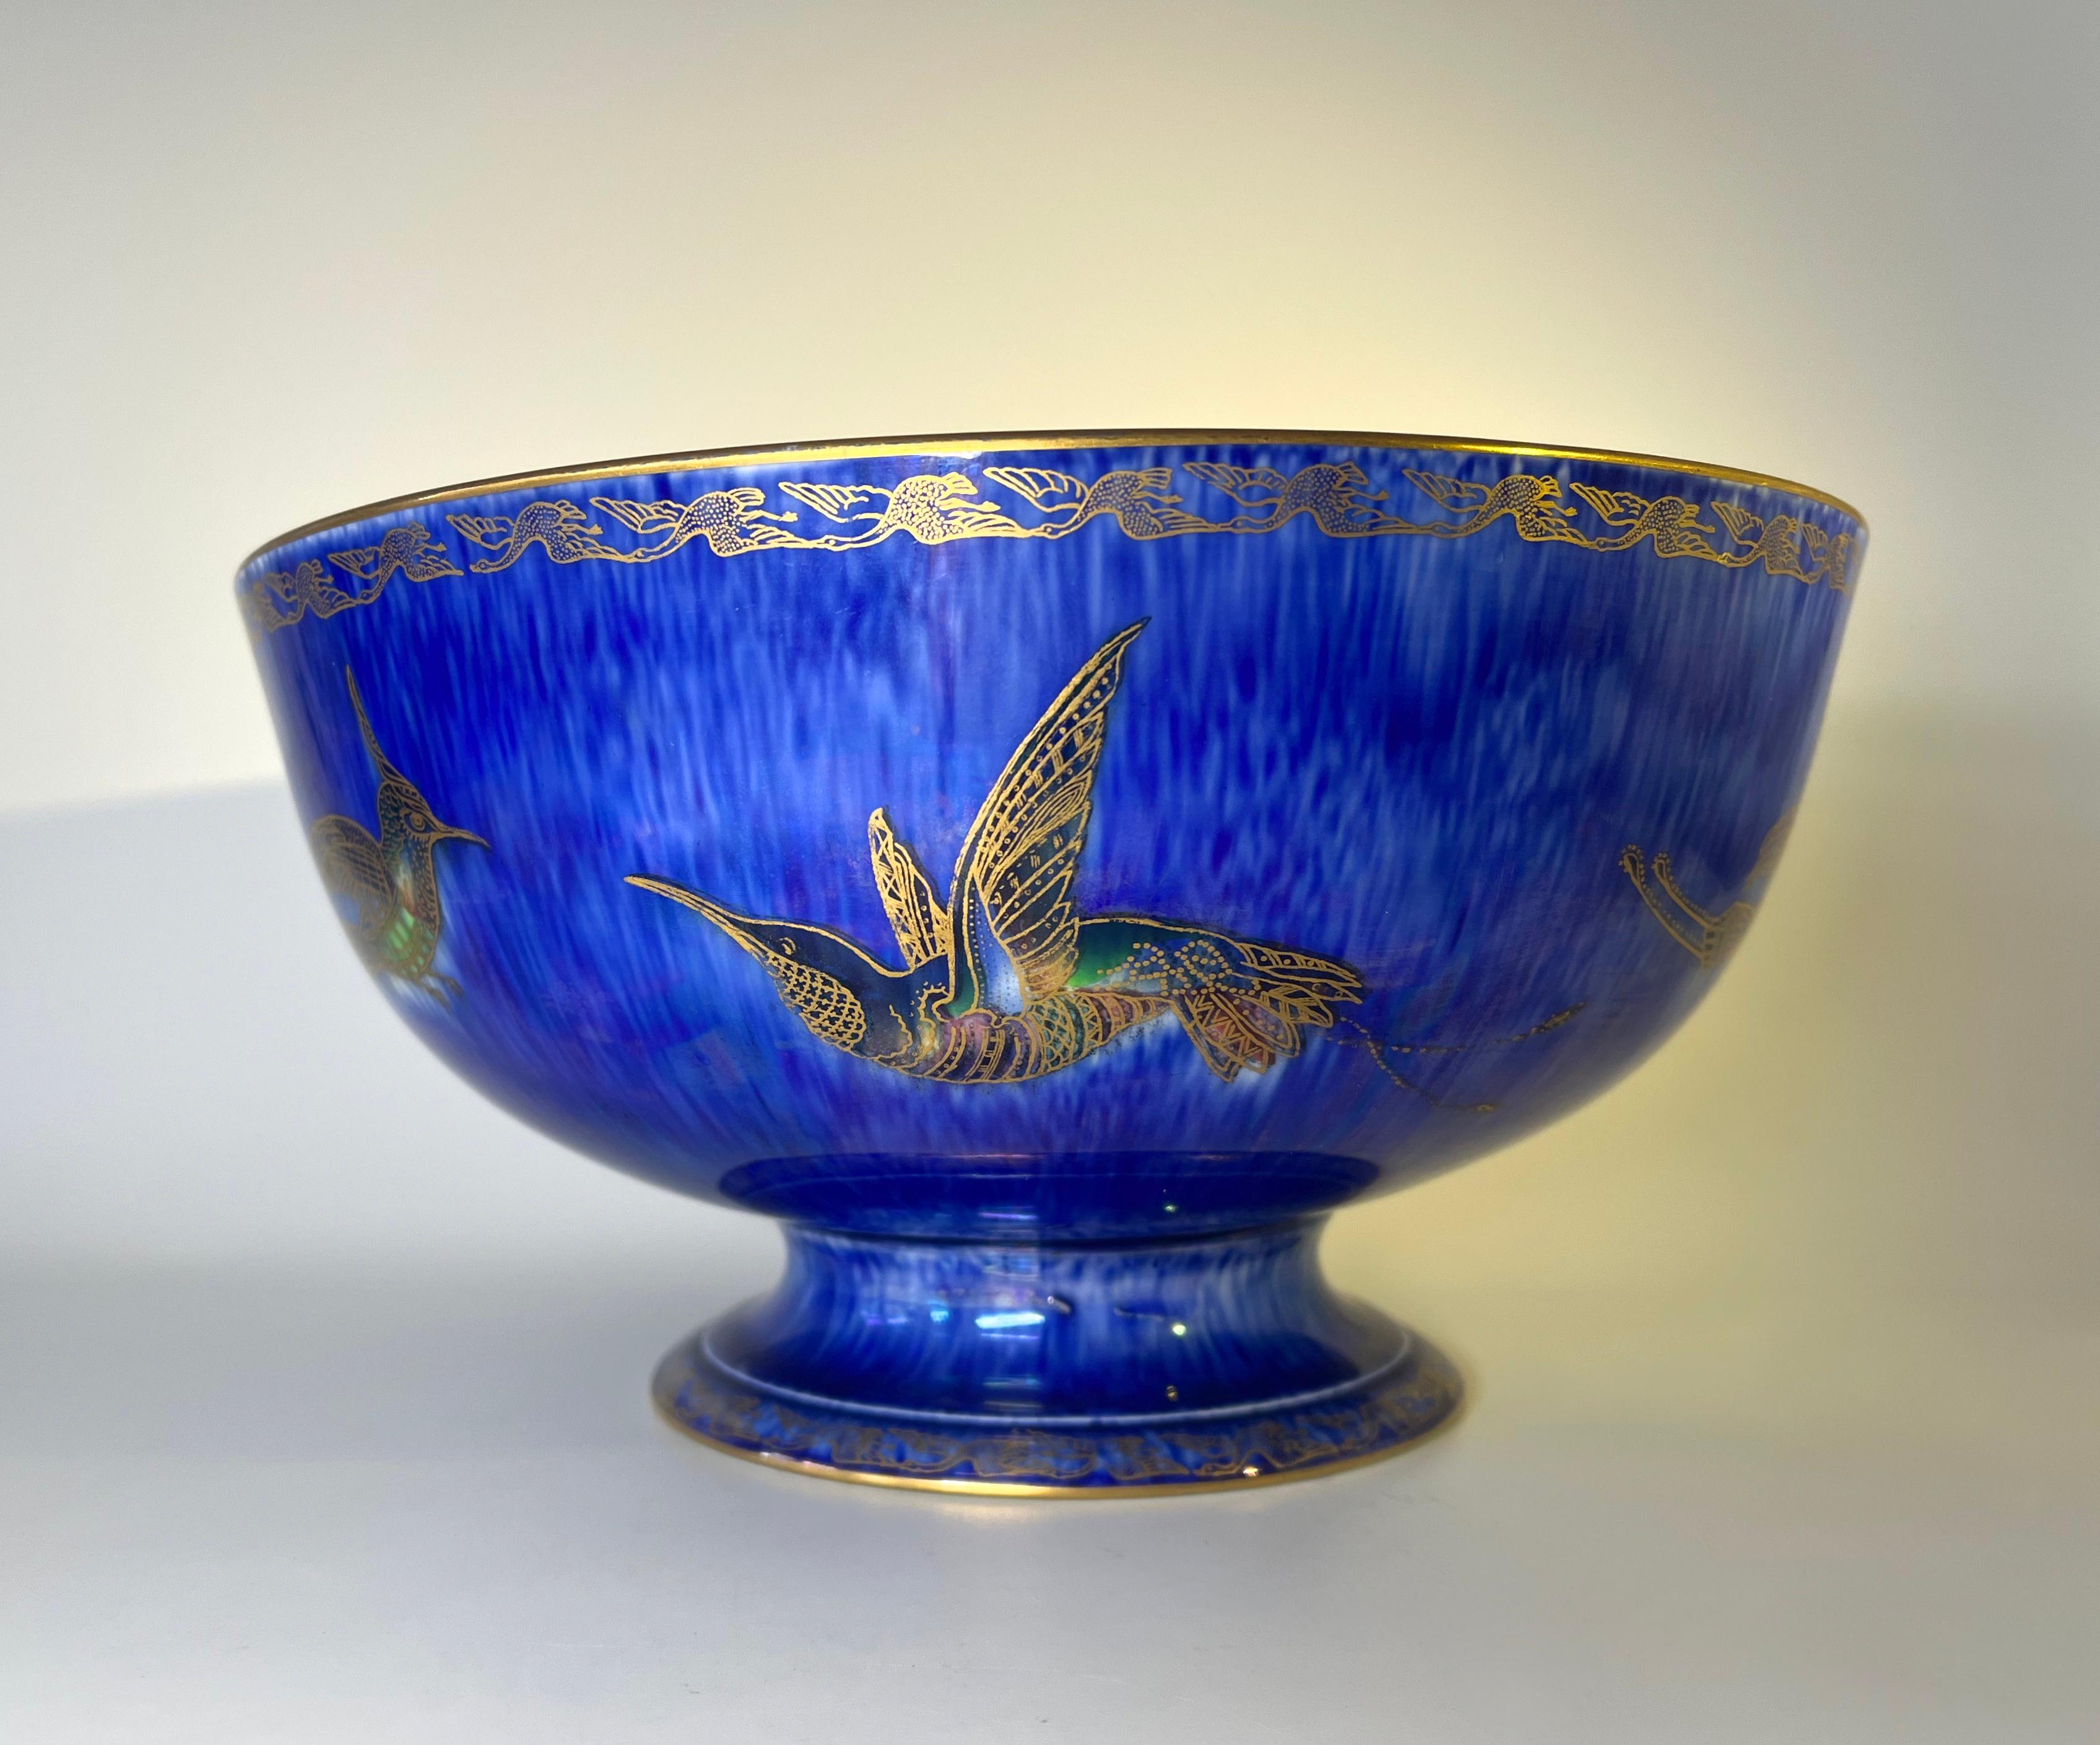 Glazed Monumental Wedgwood Ordinary Lustre Footed Bowl By Daisy Making-Jones For Sale